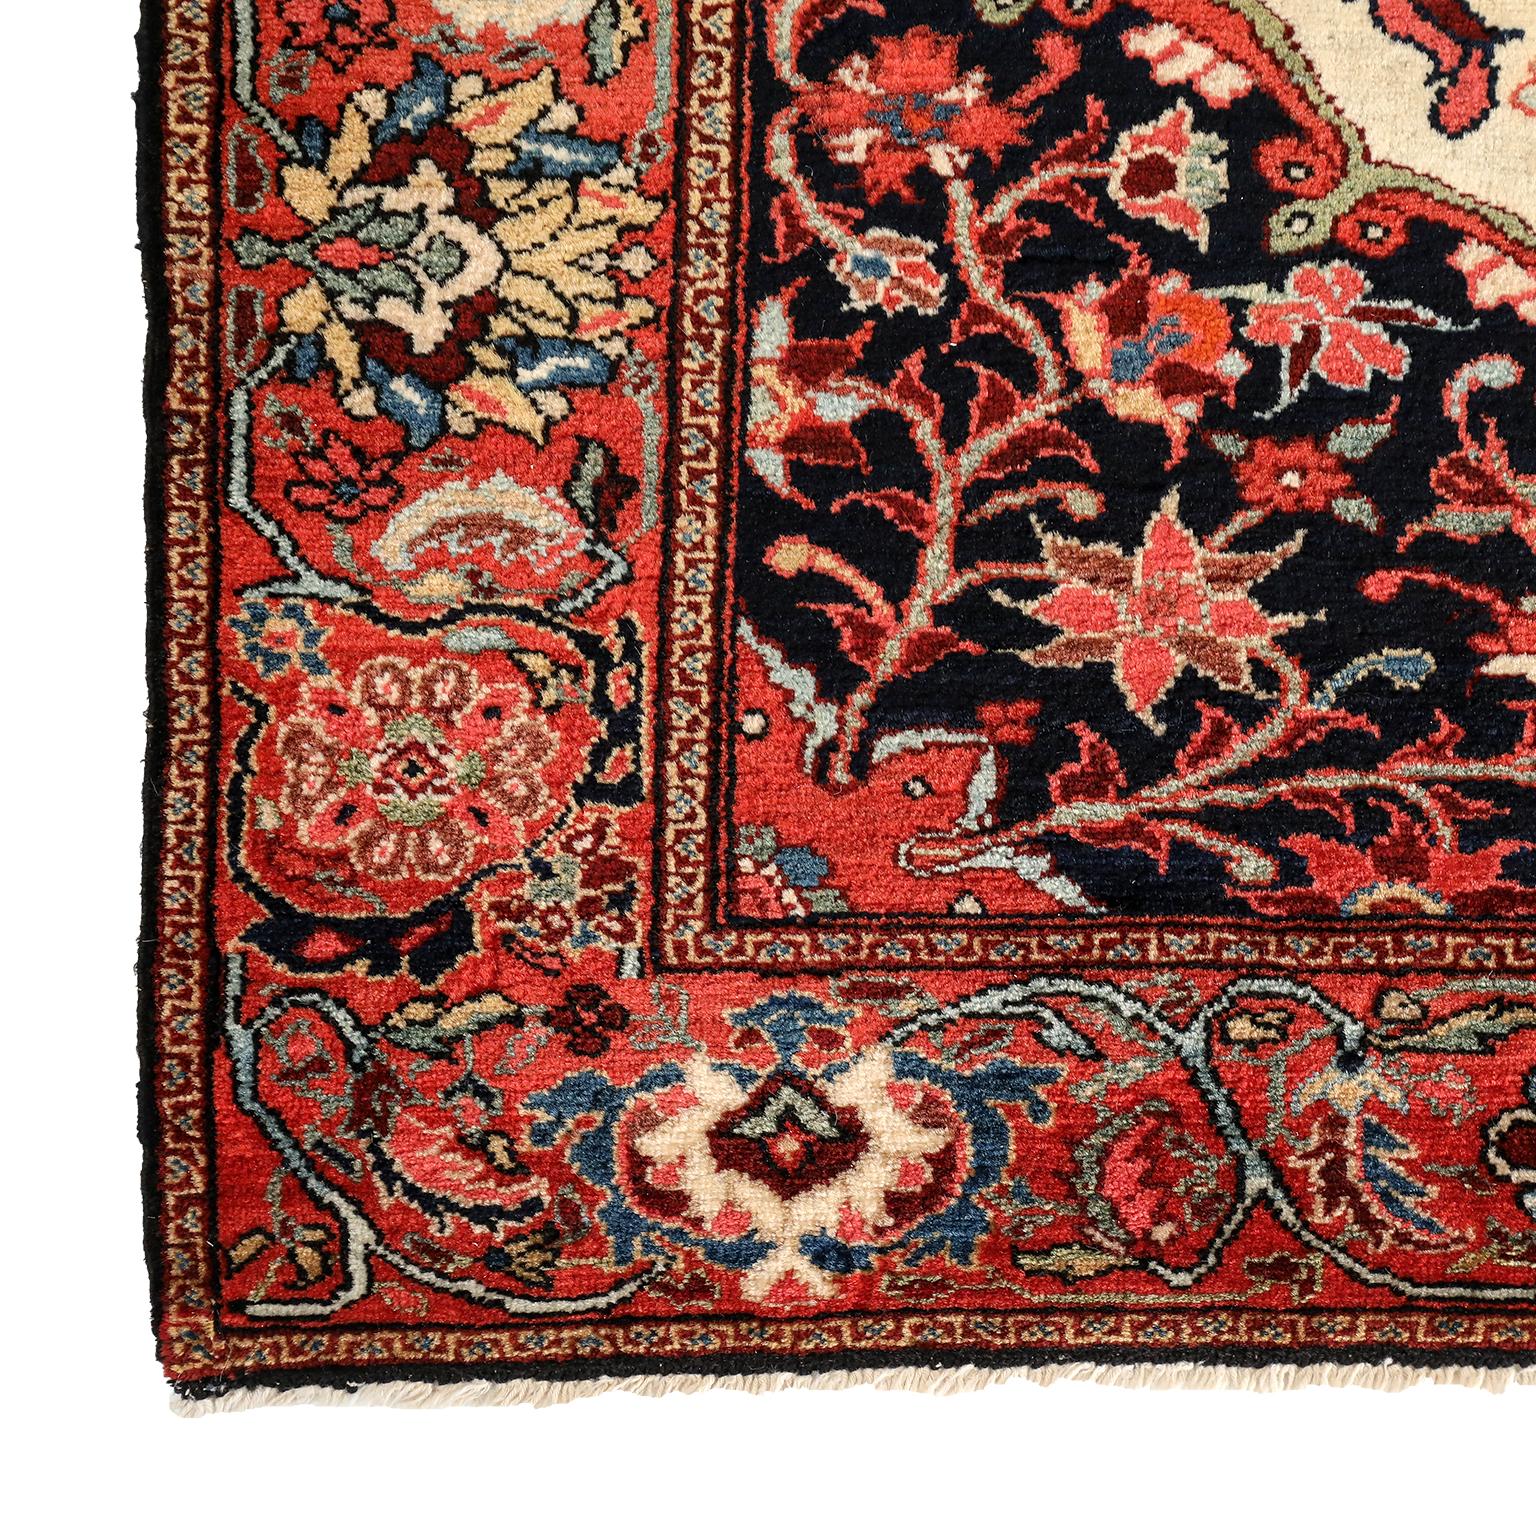 Vegetable Dyed Antique 1900s Wool Persian Meeshan Malayer Rug, 4' x 6' For Sale